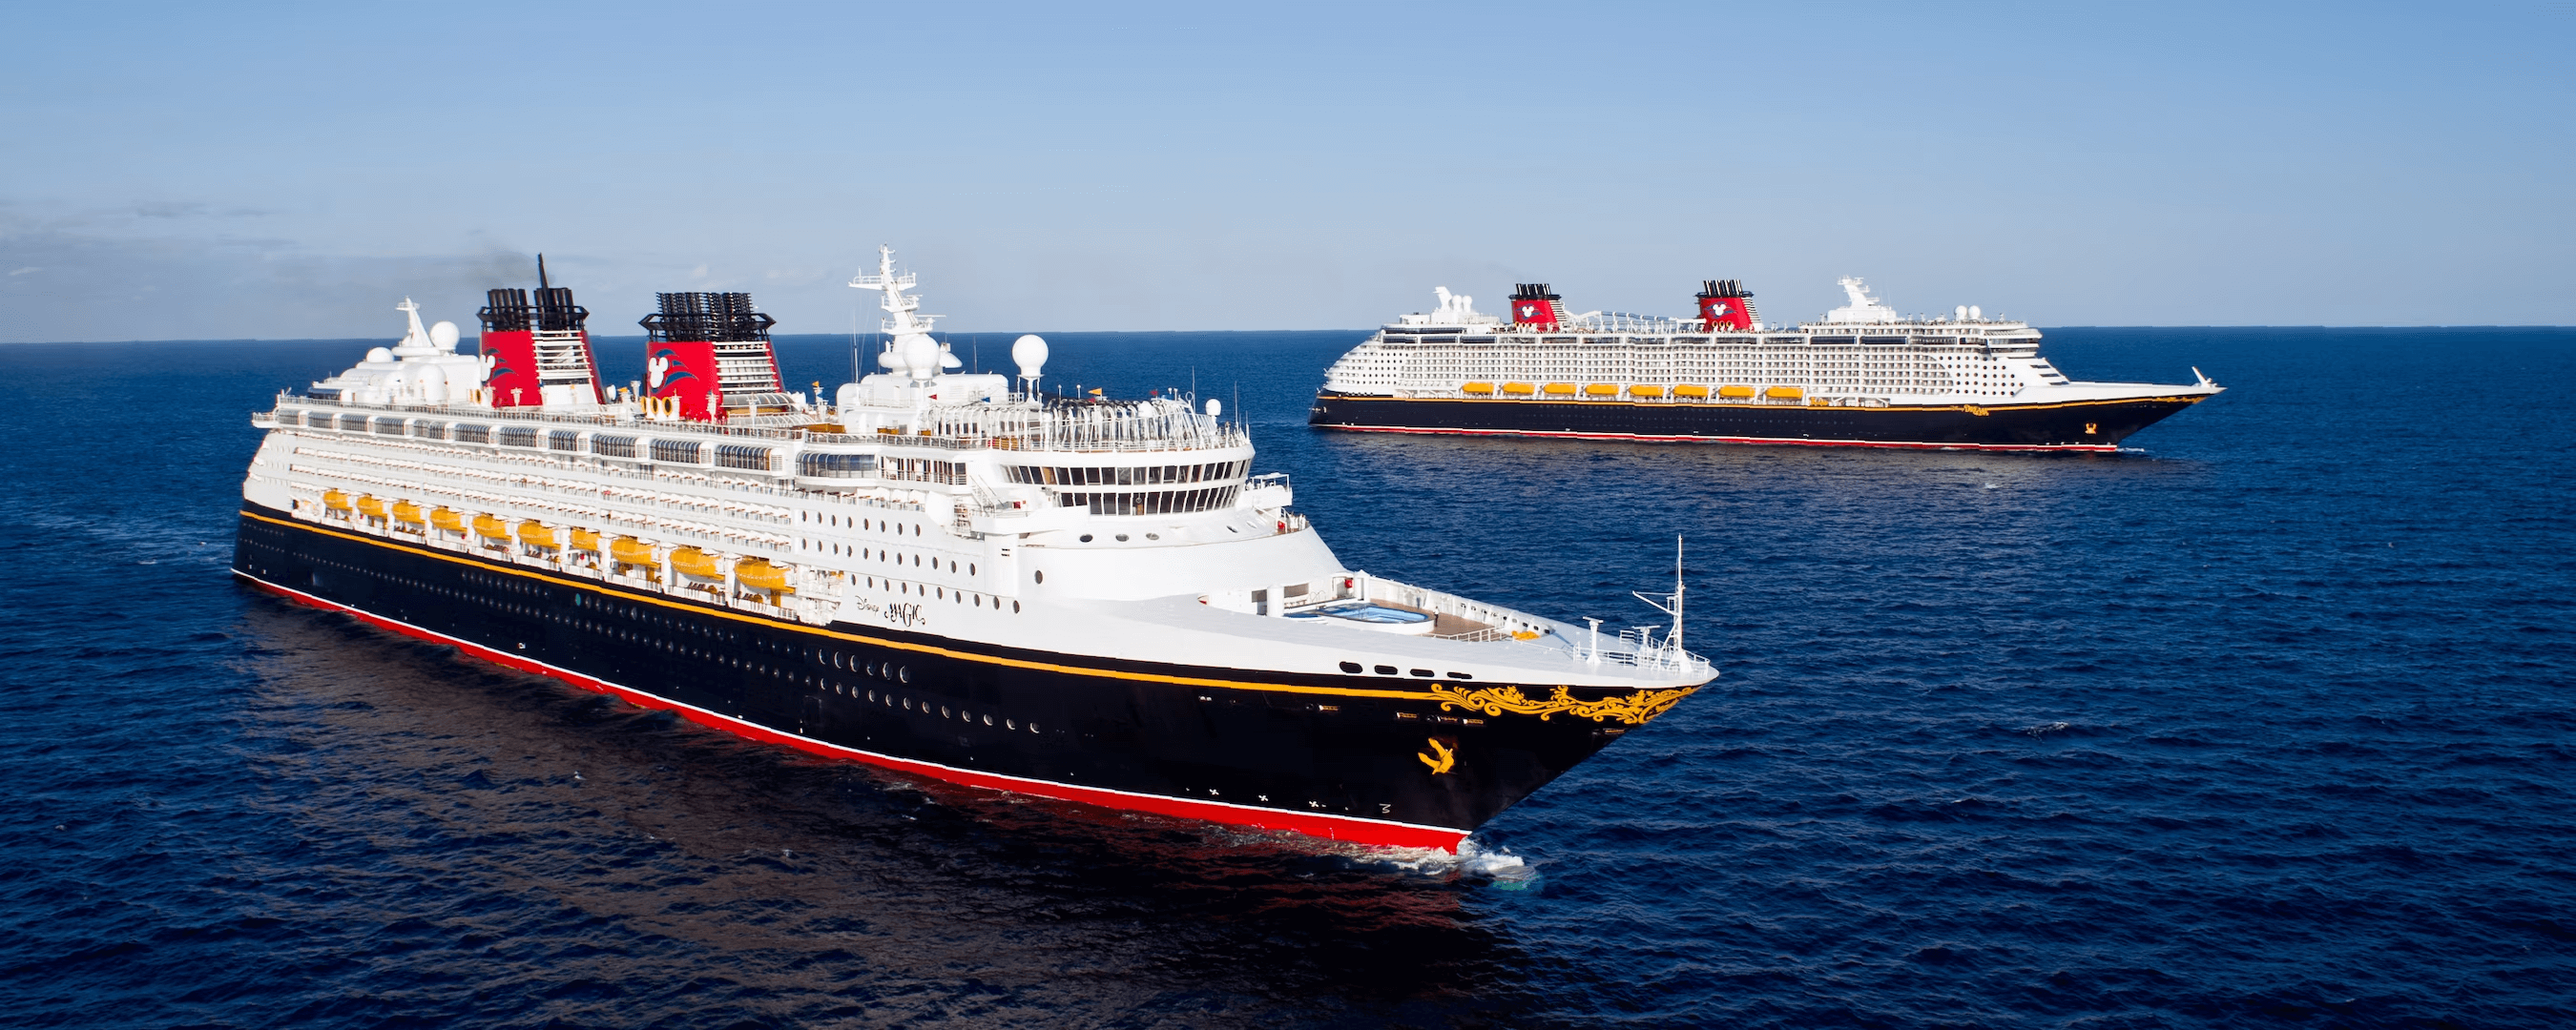 disney cruise compared to other lines